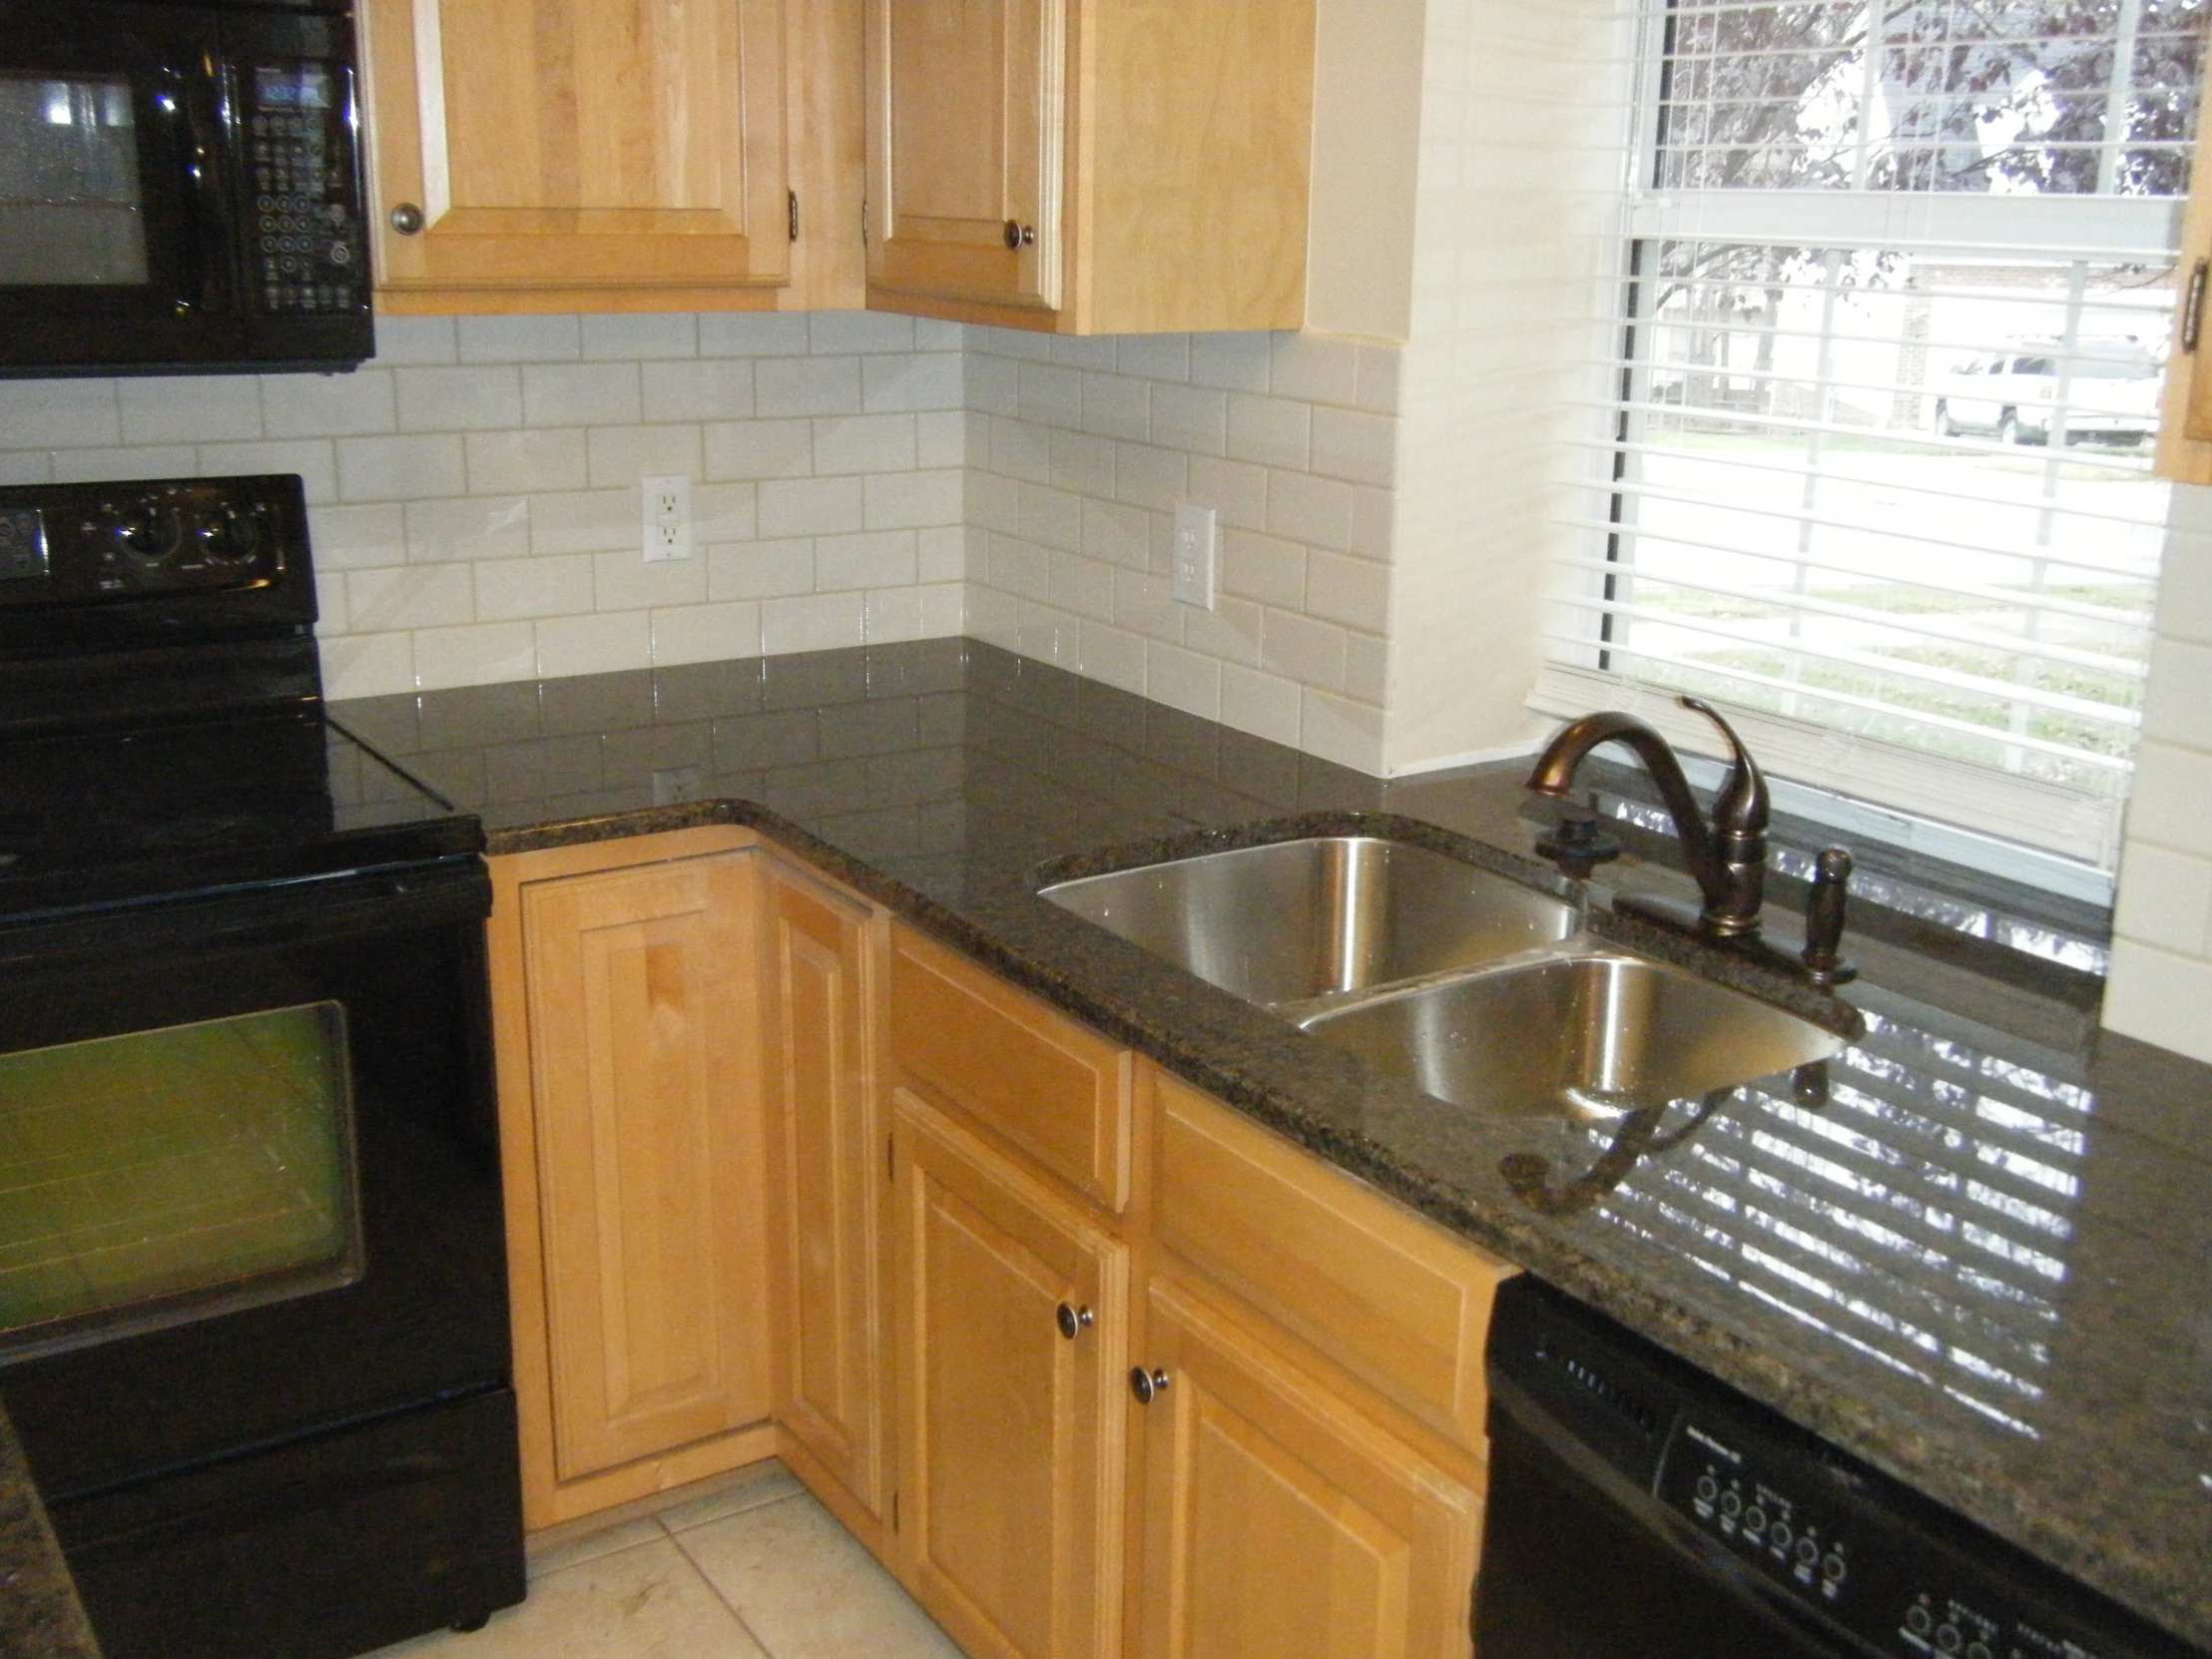 the kitchen has wood cabinets and granite counter tops